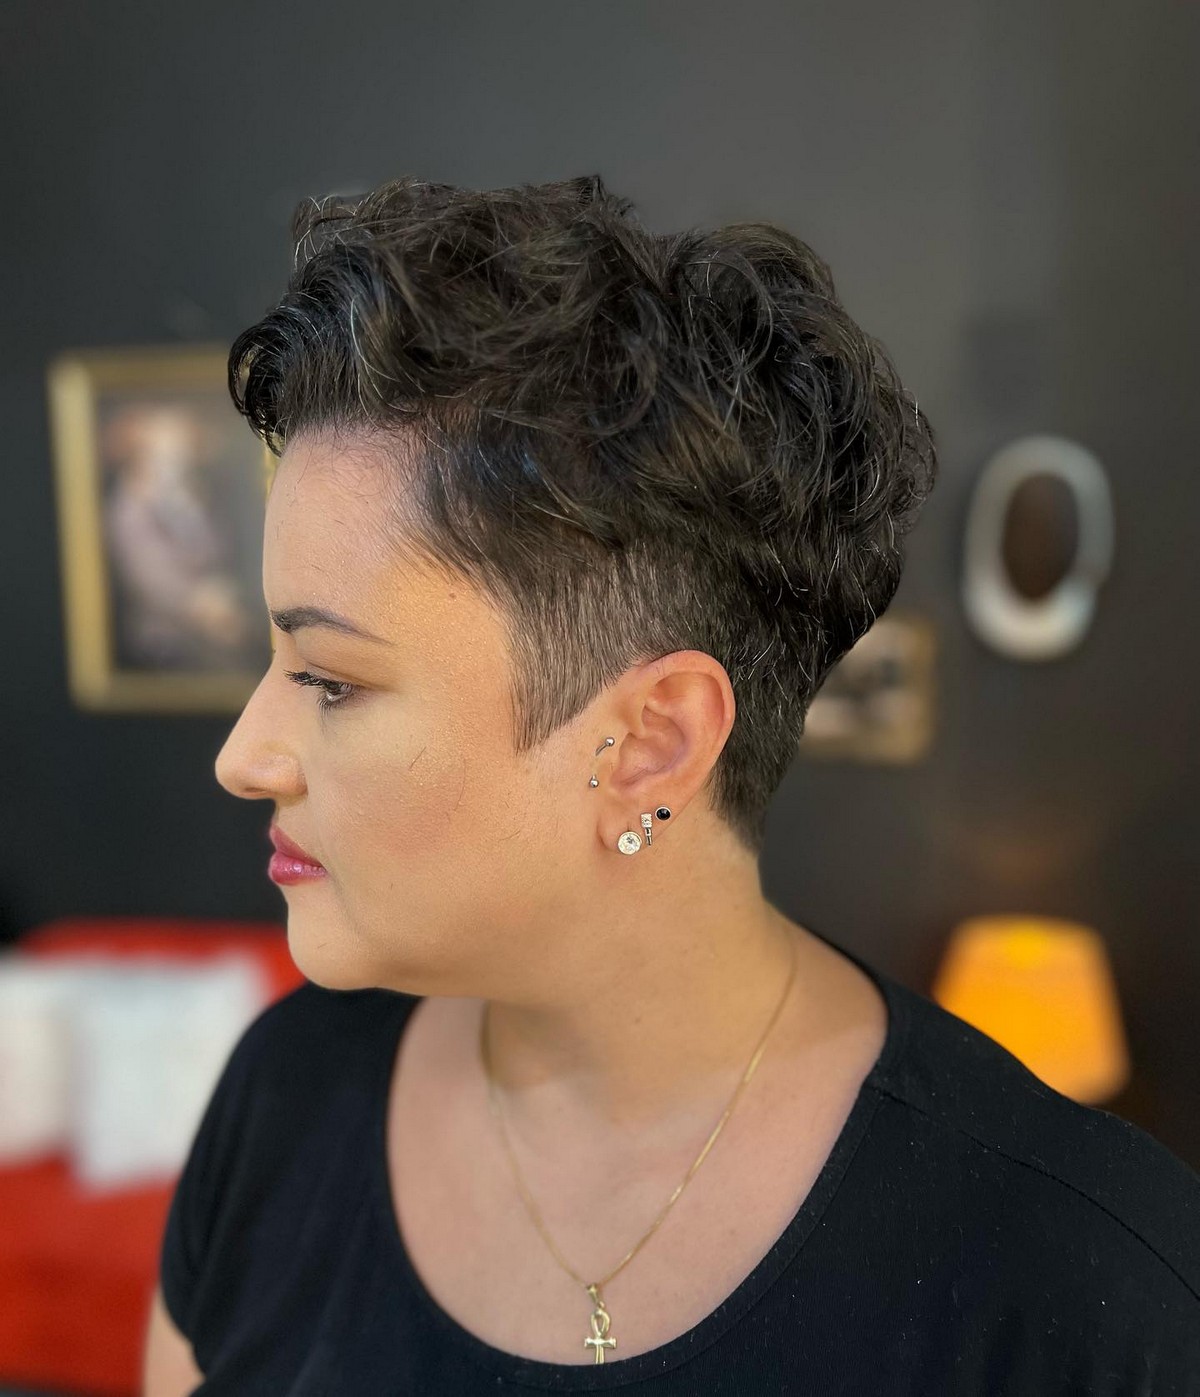 Short Curly Side-Swept Bangs with a Tapered Back